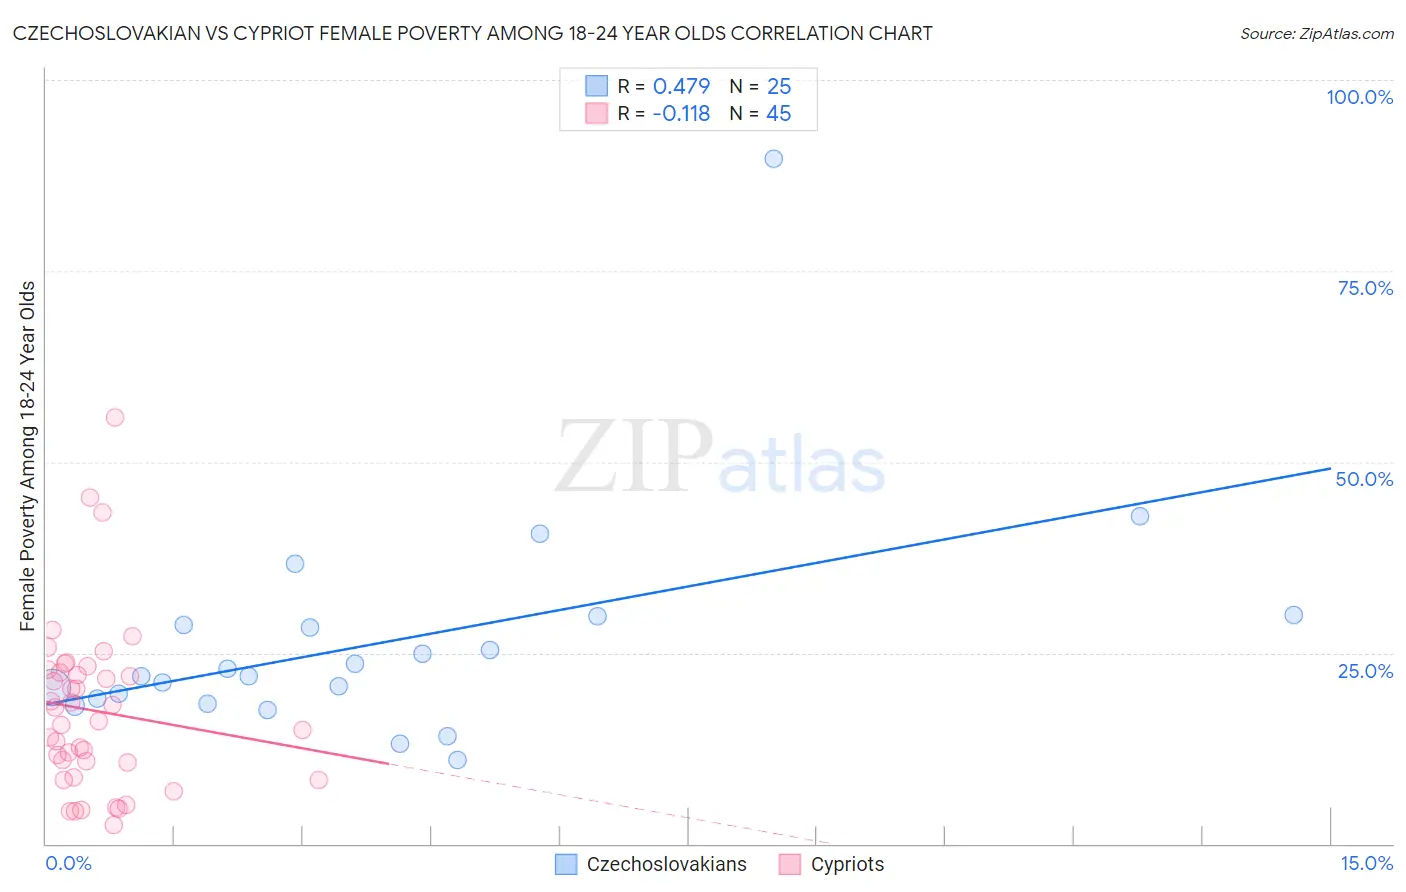 Czechoslovakian vs Cypriot Female Poverty Among 18-24 Year Olds